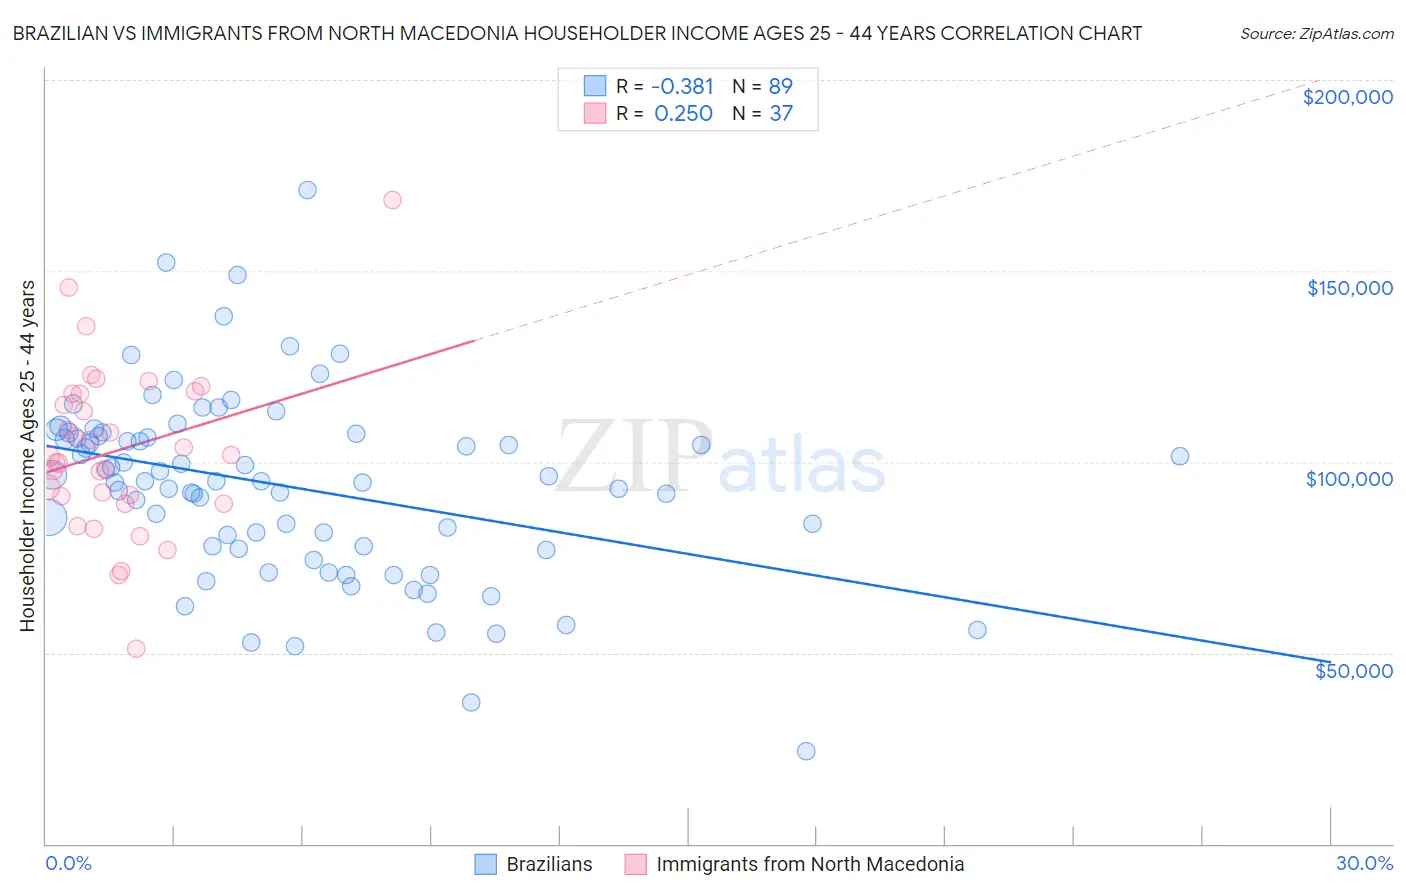 Brazilian vs Immigrants from North Macedonia Householder Income Ages 25 - 44 years